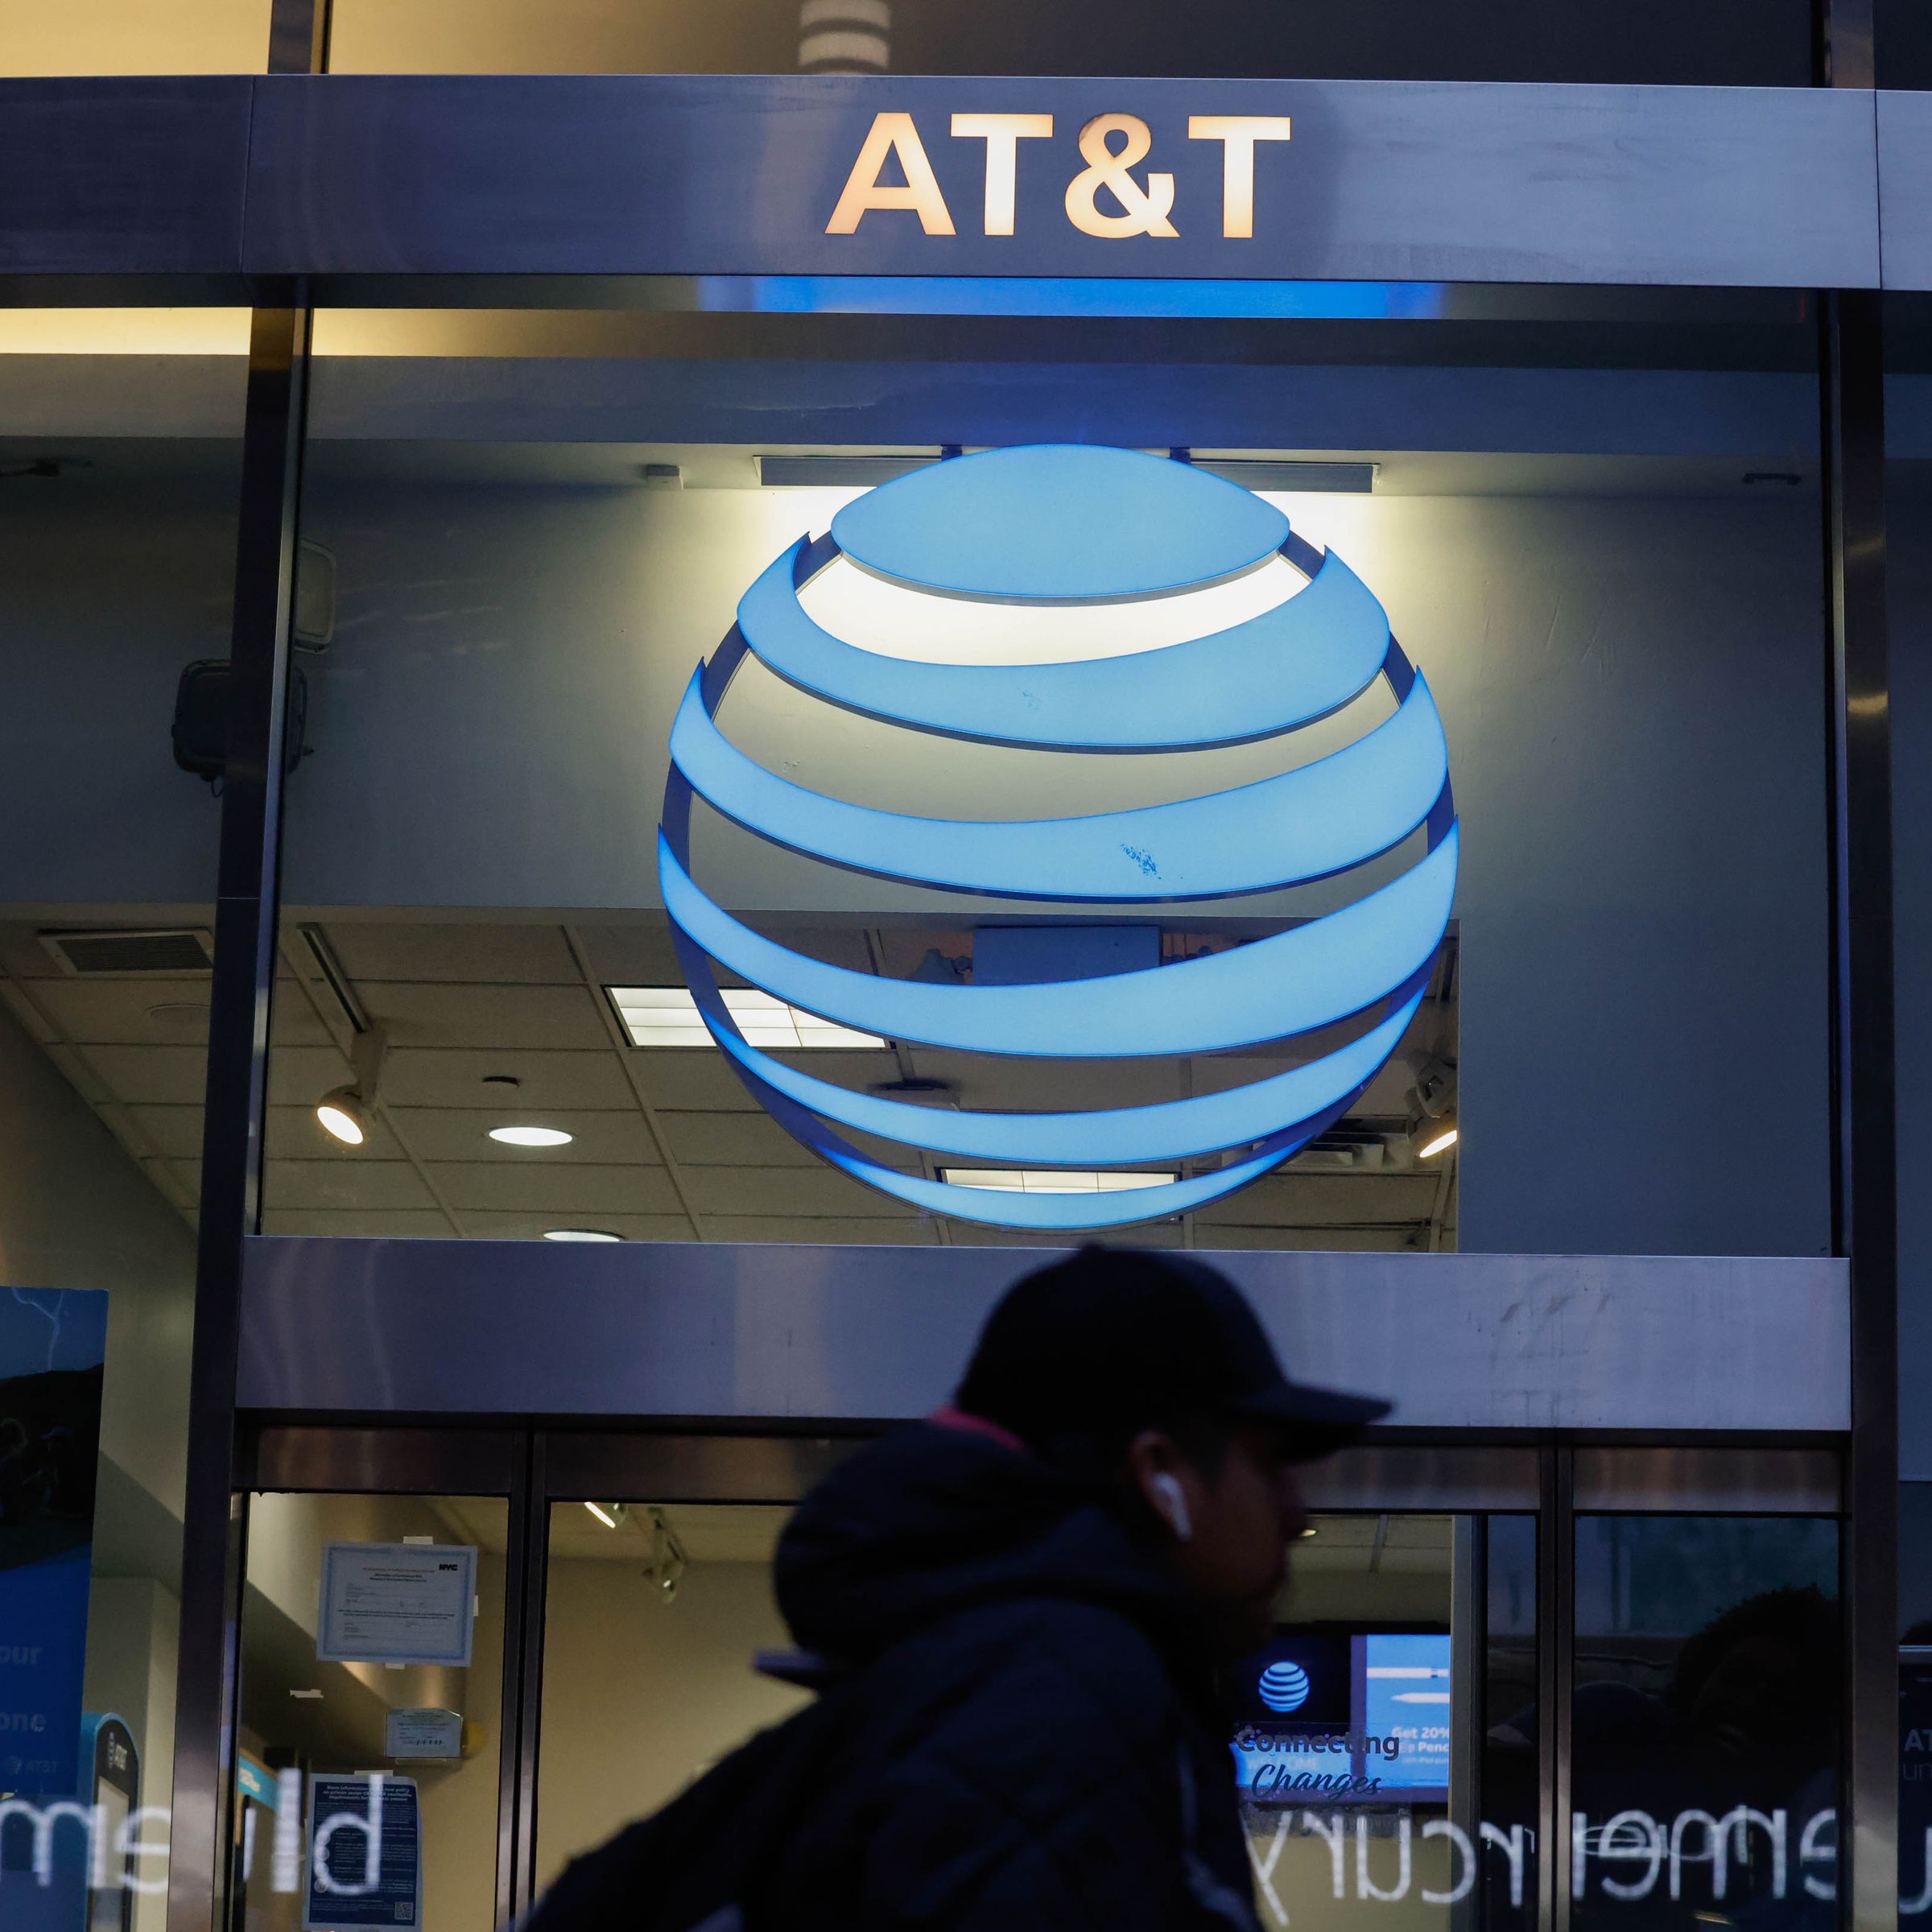 A person wearing earbuds walks past a storefront with the AT&amp;T logo above the person’s head.